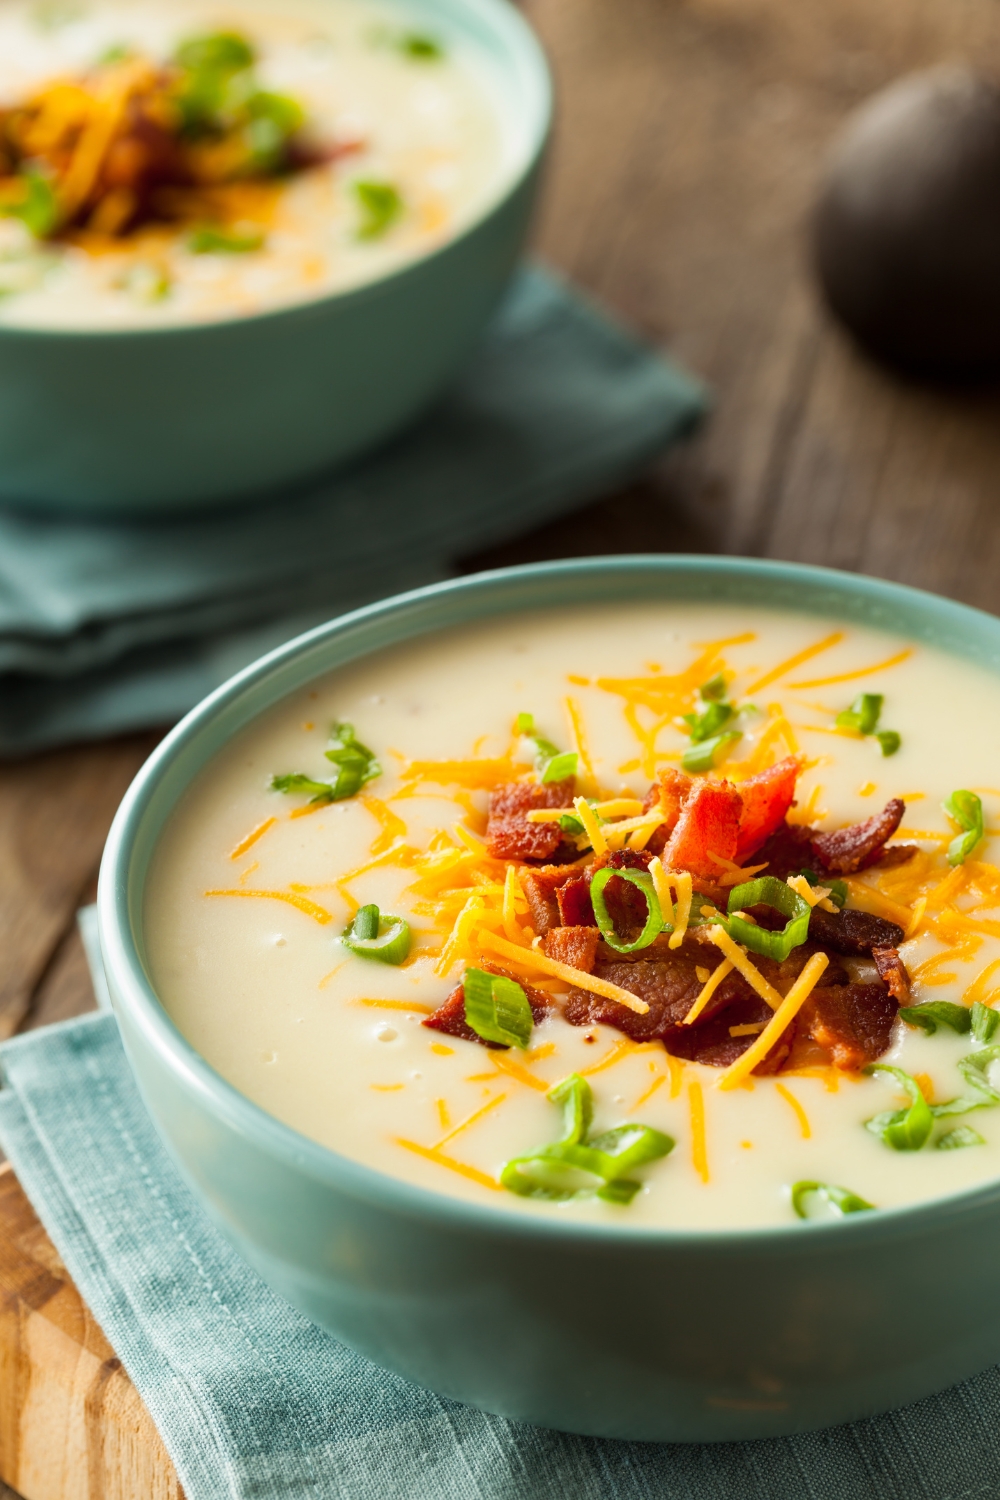 https://insanelygoodrecipes.com/wp-content/uploads/2023/01/Homemade-Sweet-Potato-Soup-with-Bacon-Cheese-and-Onions-in-a-Bowl.jpg